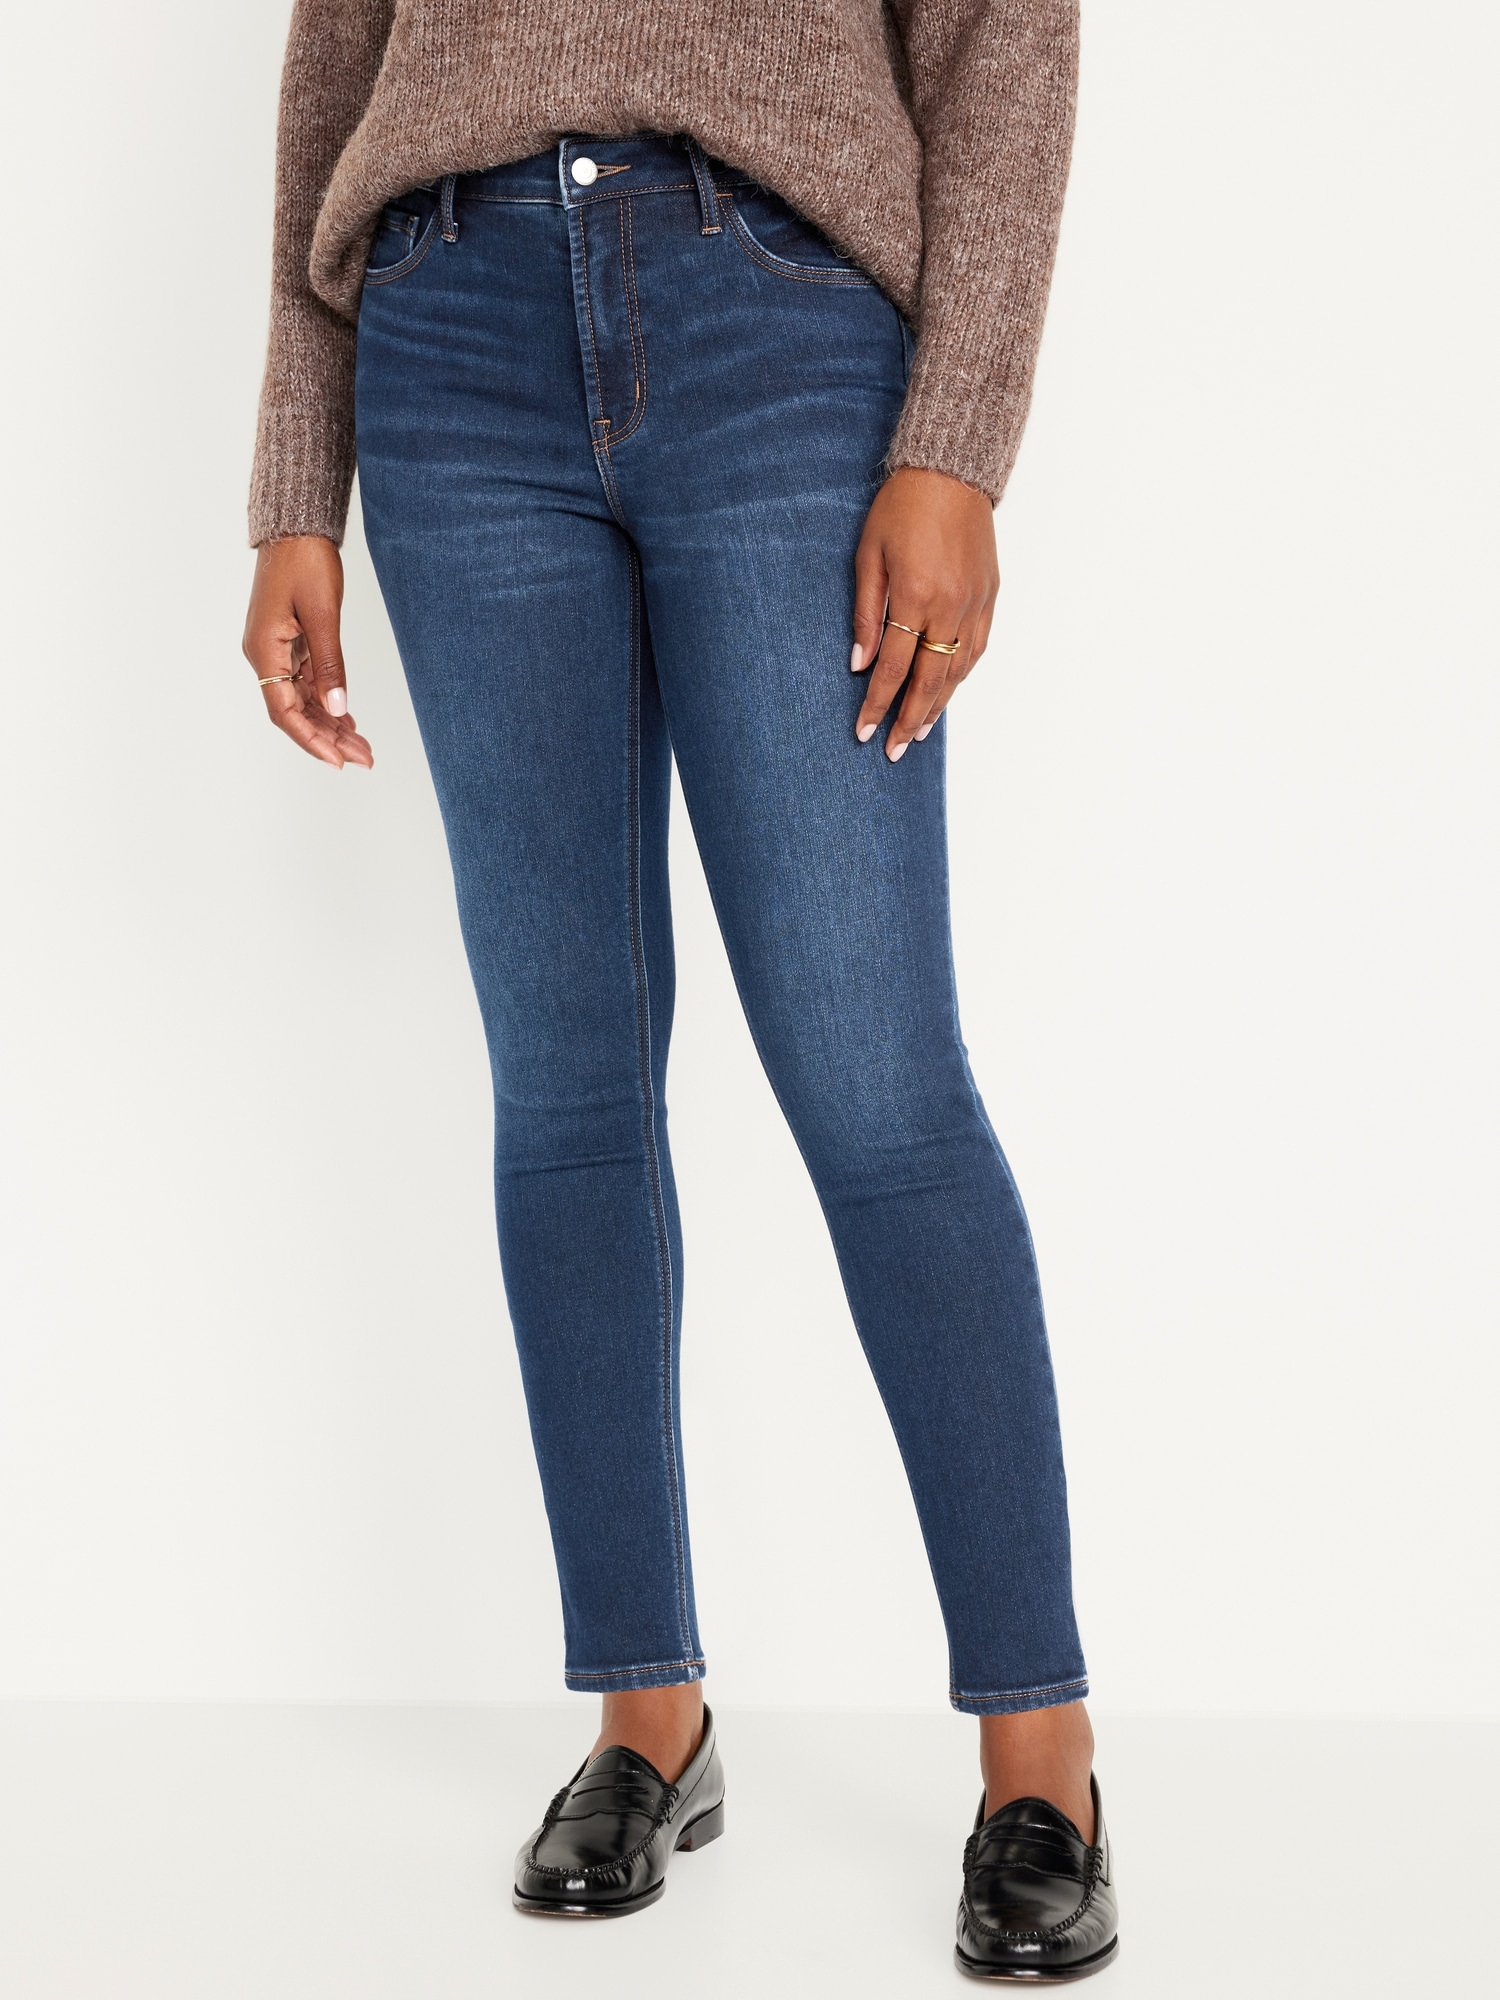 High-Waisted Built-In Warm Rockstar Super-Skinny Jeans